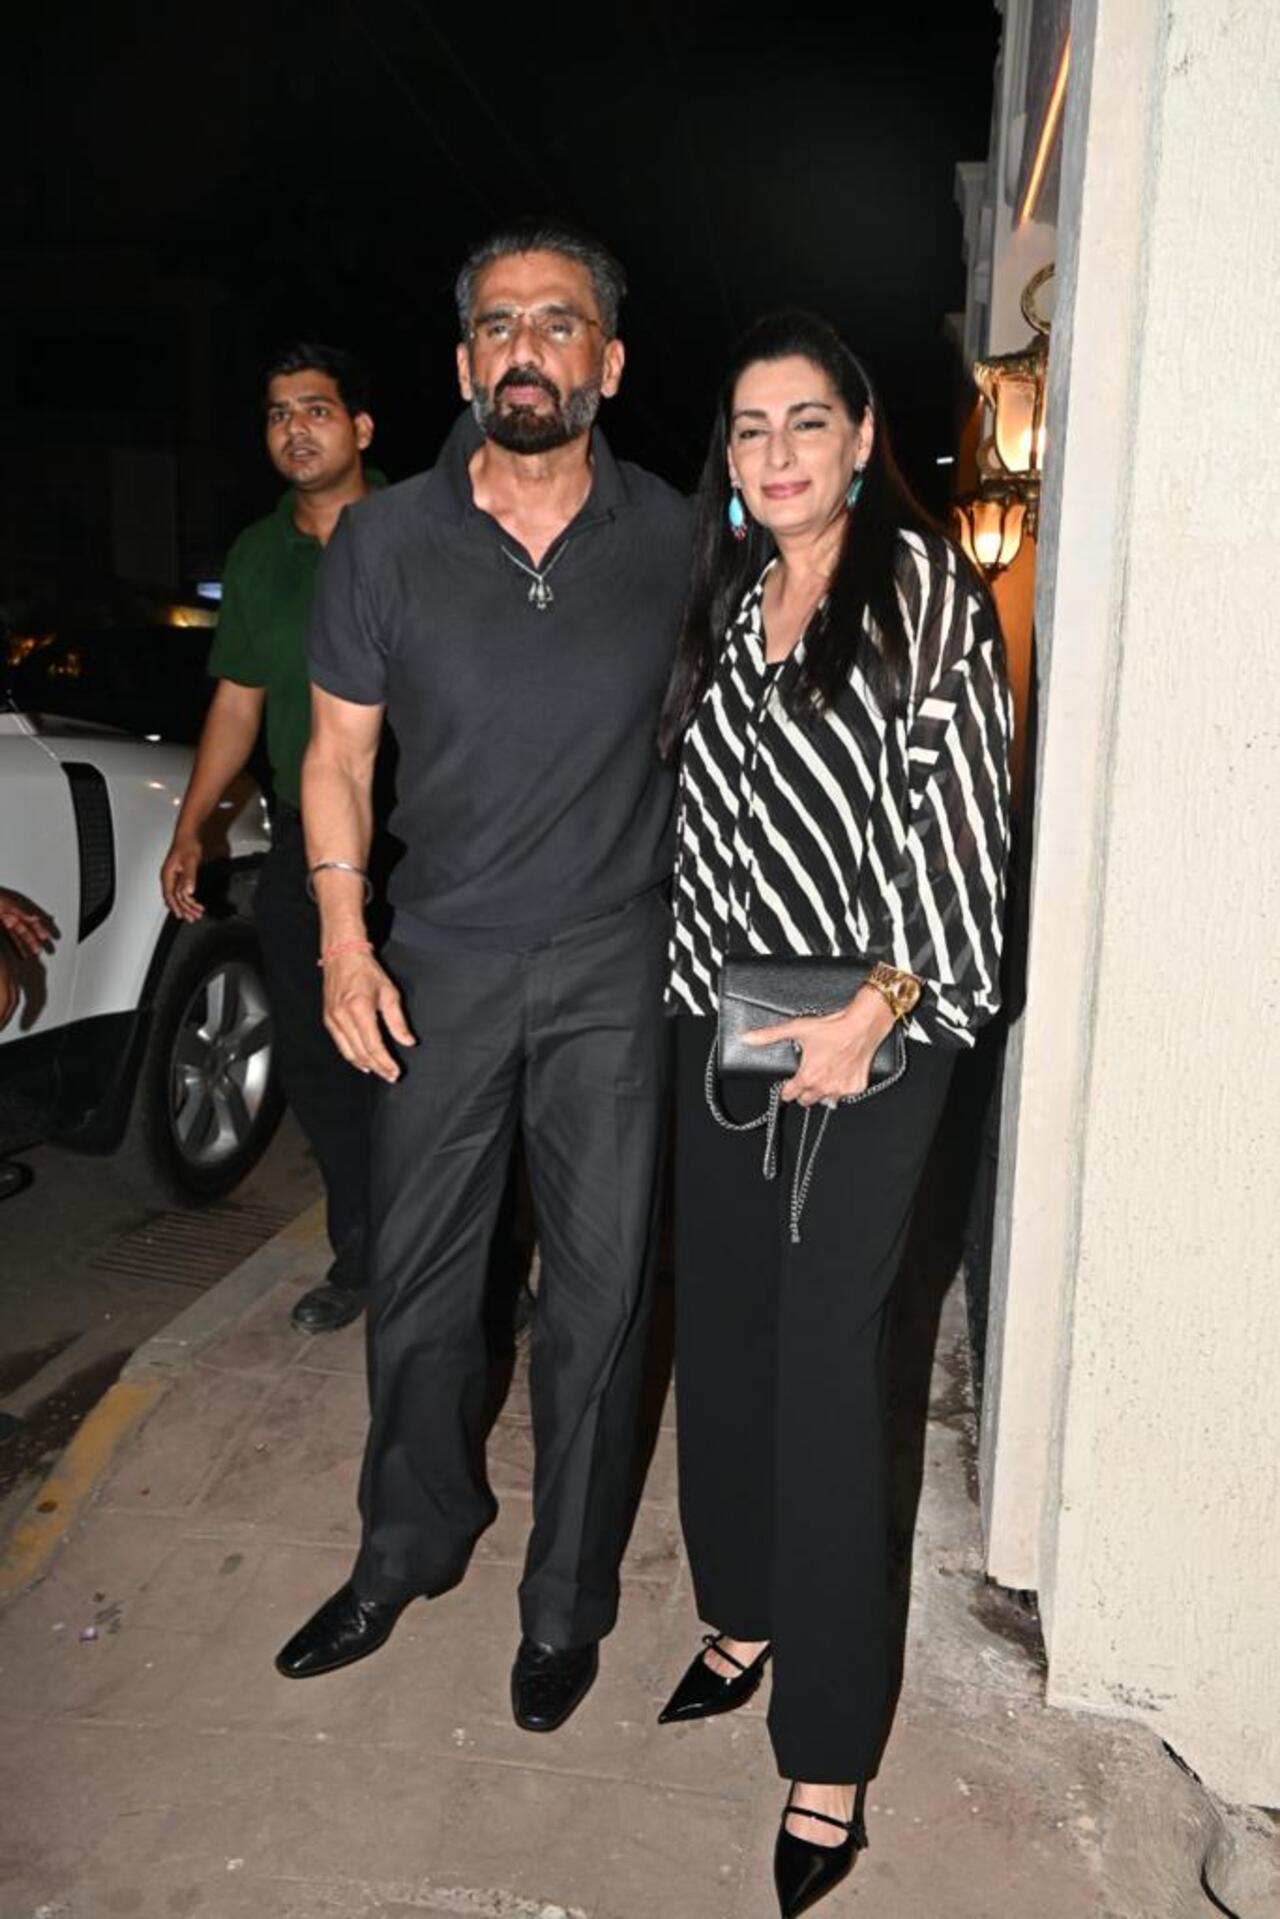 Suniel Shetty was seen at the new spot in the city with his wife Mana Shetty